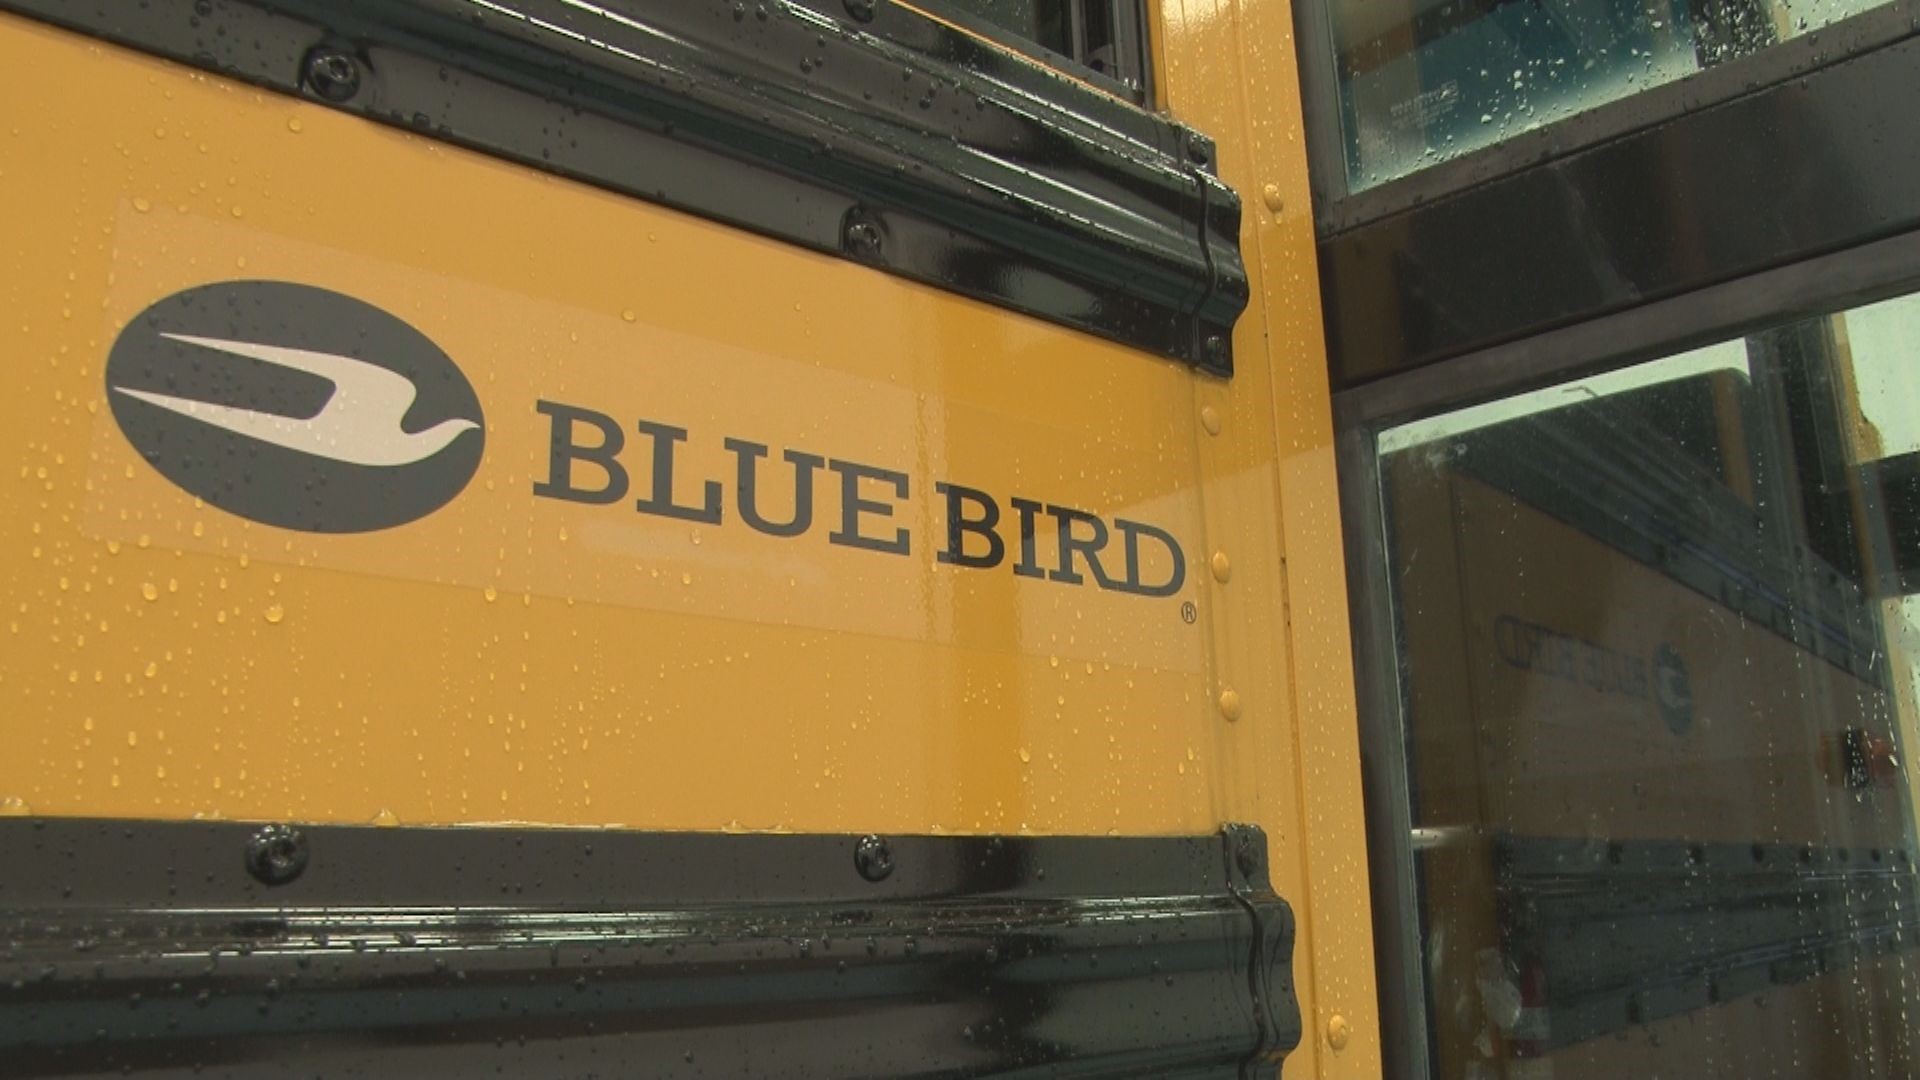 Advanced automotive high school students can take a course specializing in the maintenance and manufacturing of Blue Bird buses, which could lead to a job.